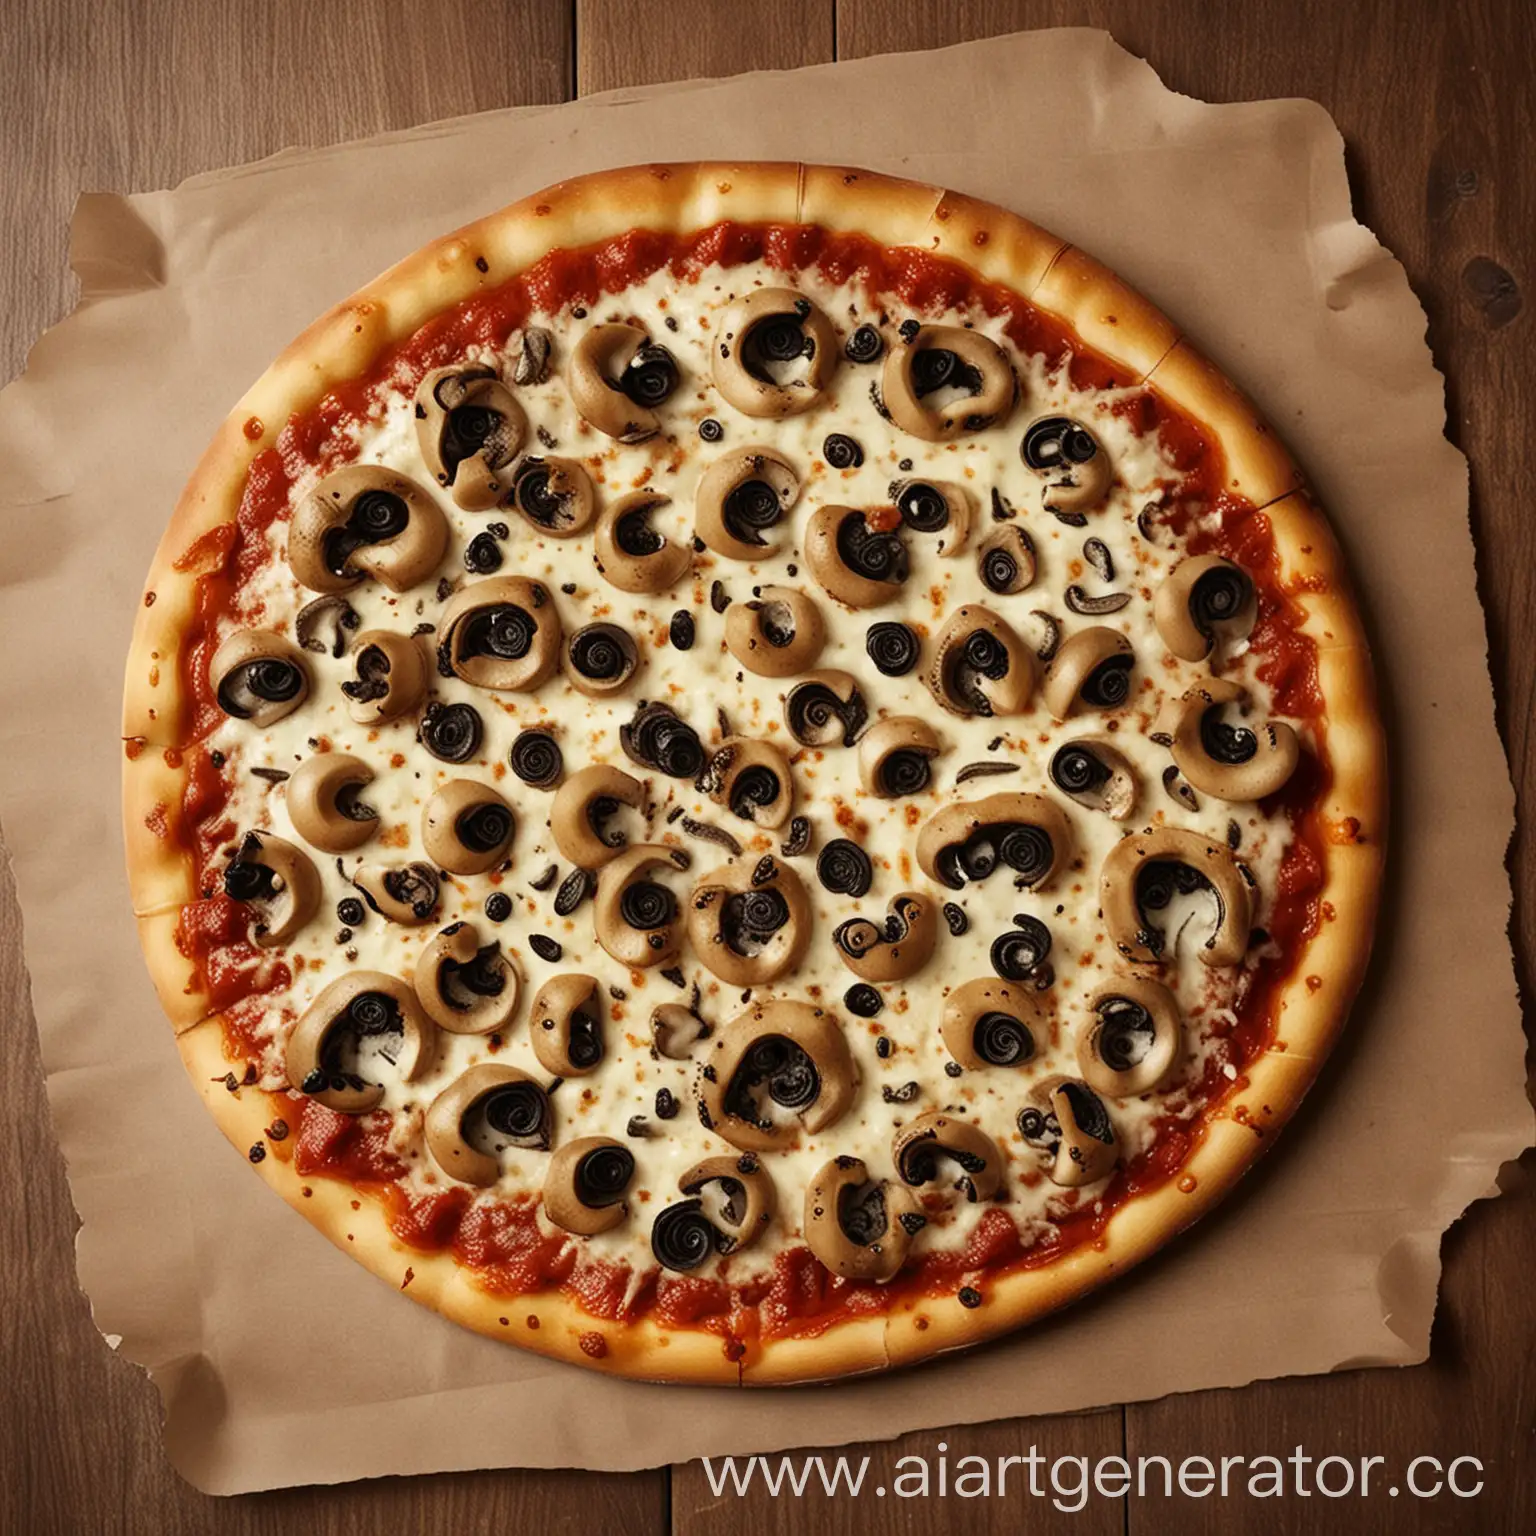 Delicious-Mushroom-Pizza-Tempting-and-Irresistible-Food-Art